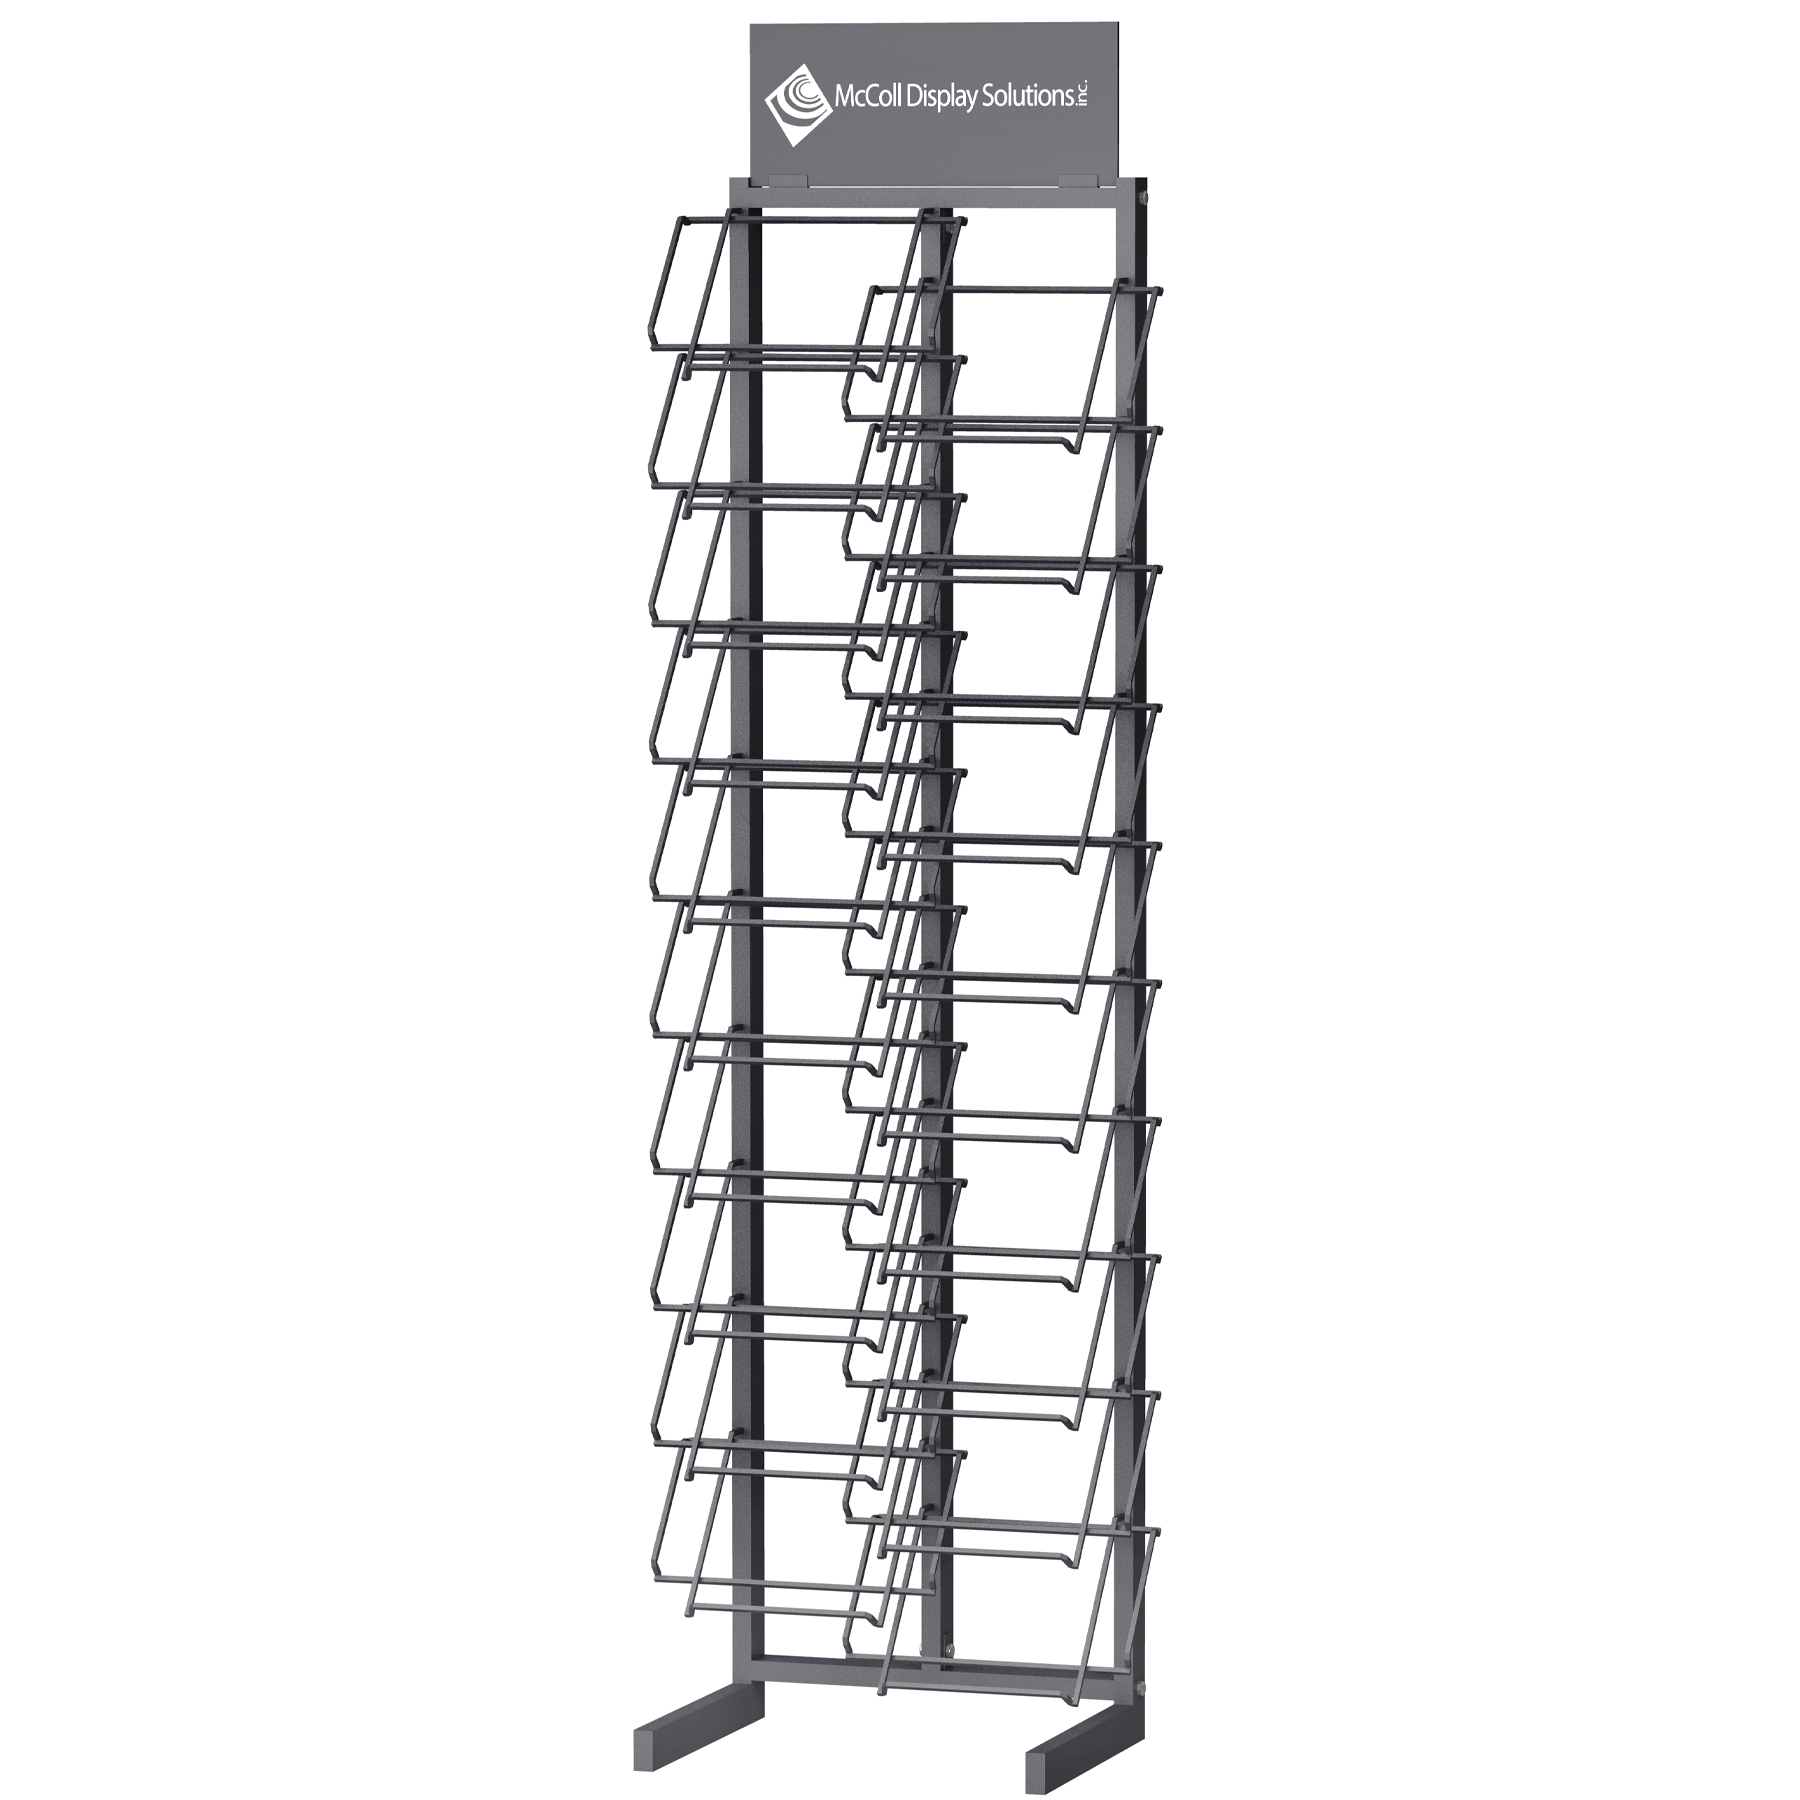 CD39 Powder Coated Steel Tube Tower Sample Display Wire Shelf System Staggered Arrangement